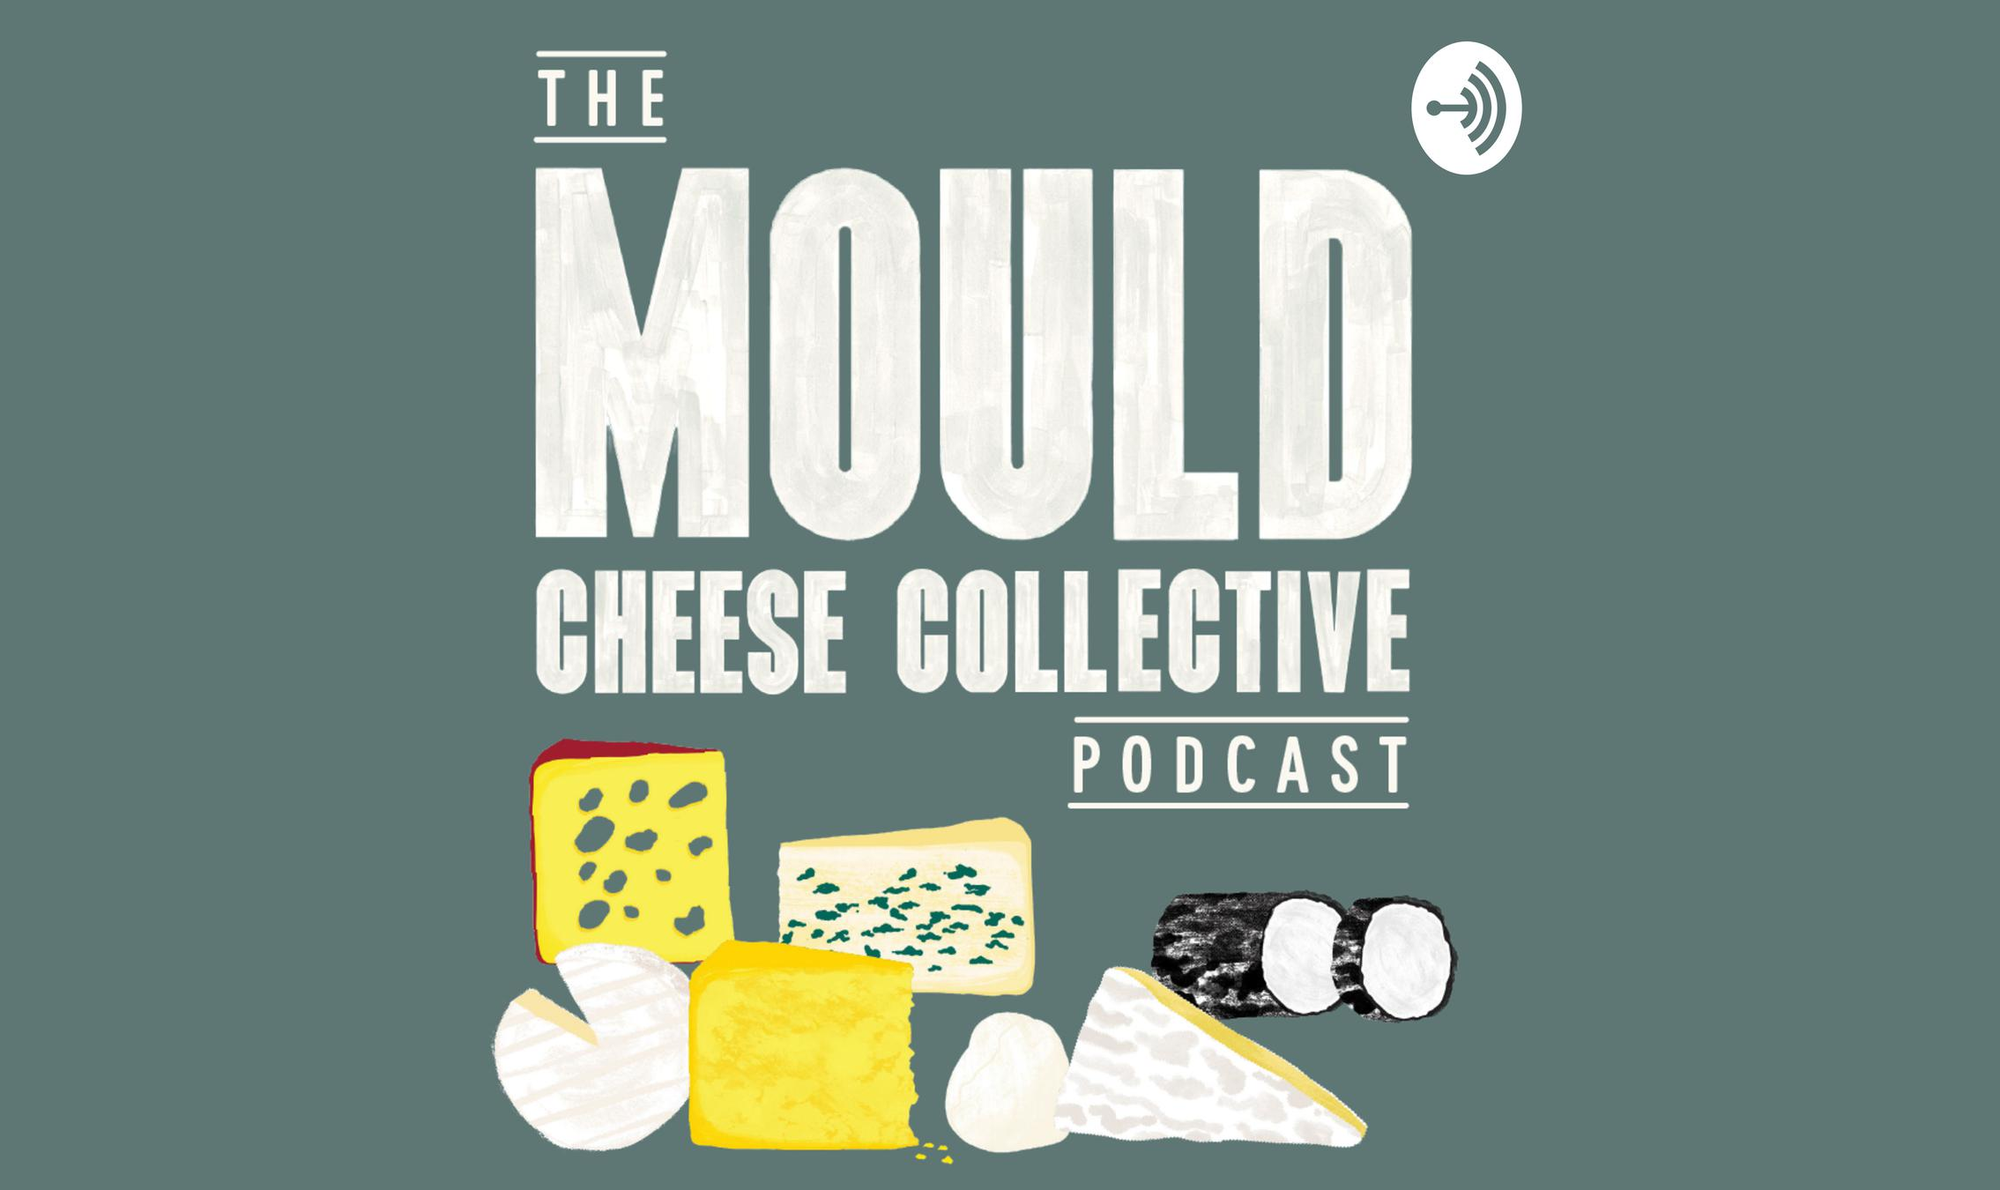 Harper & Blohm Cheese Shop featured on The Mould Cheese Collective Podcast